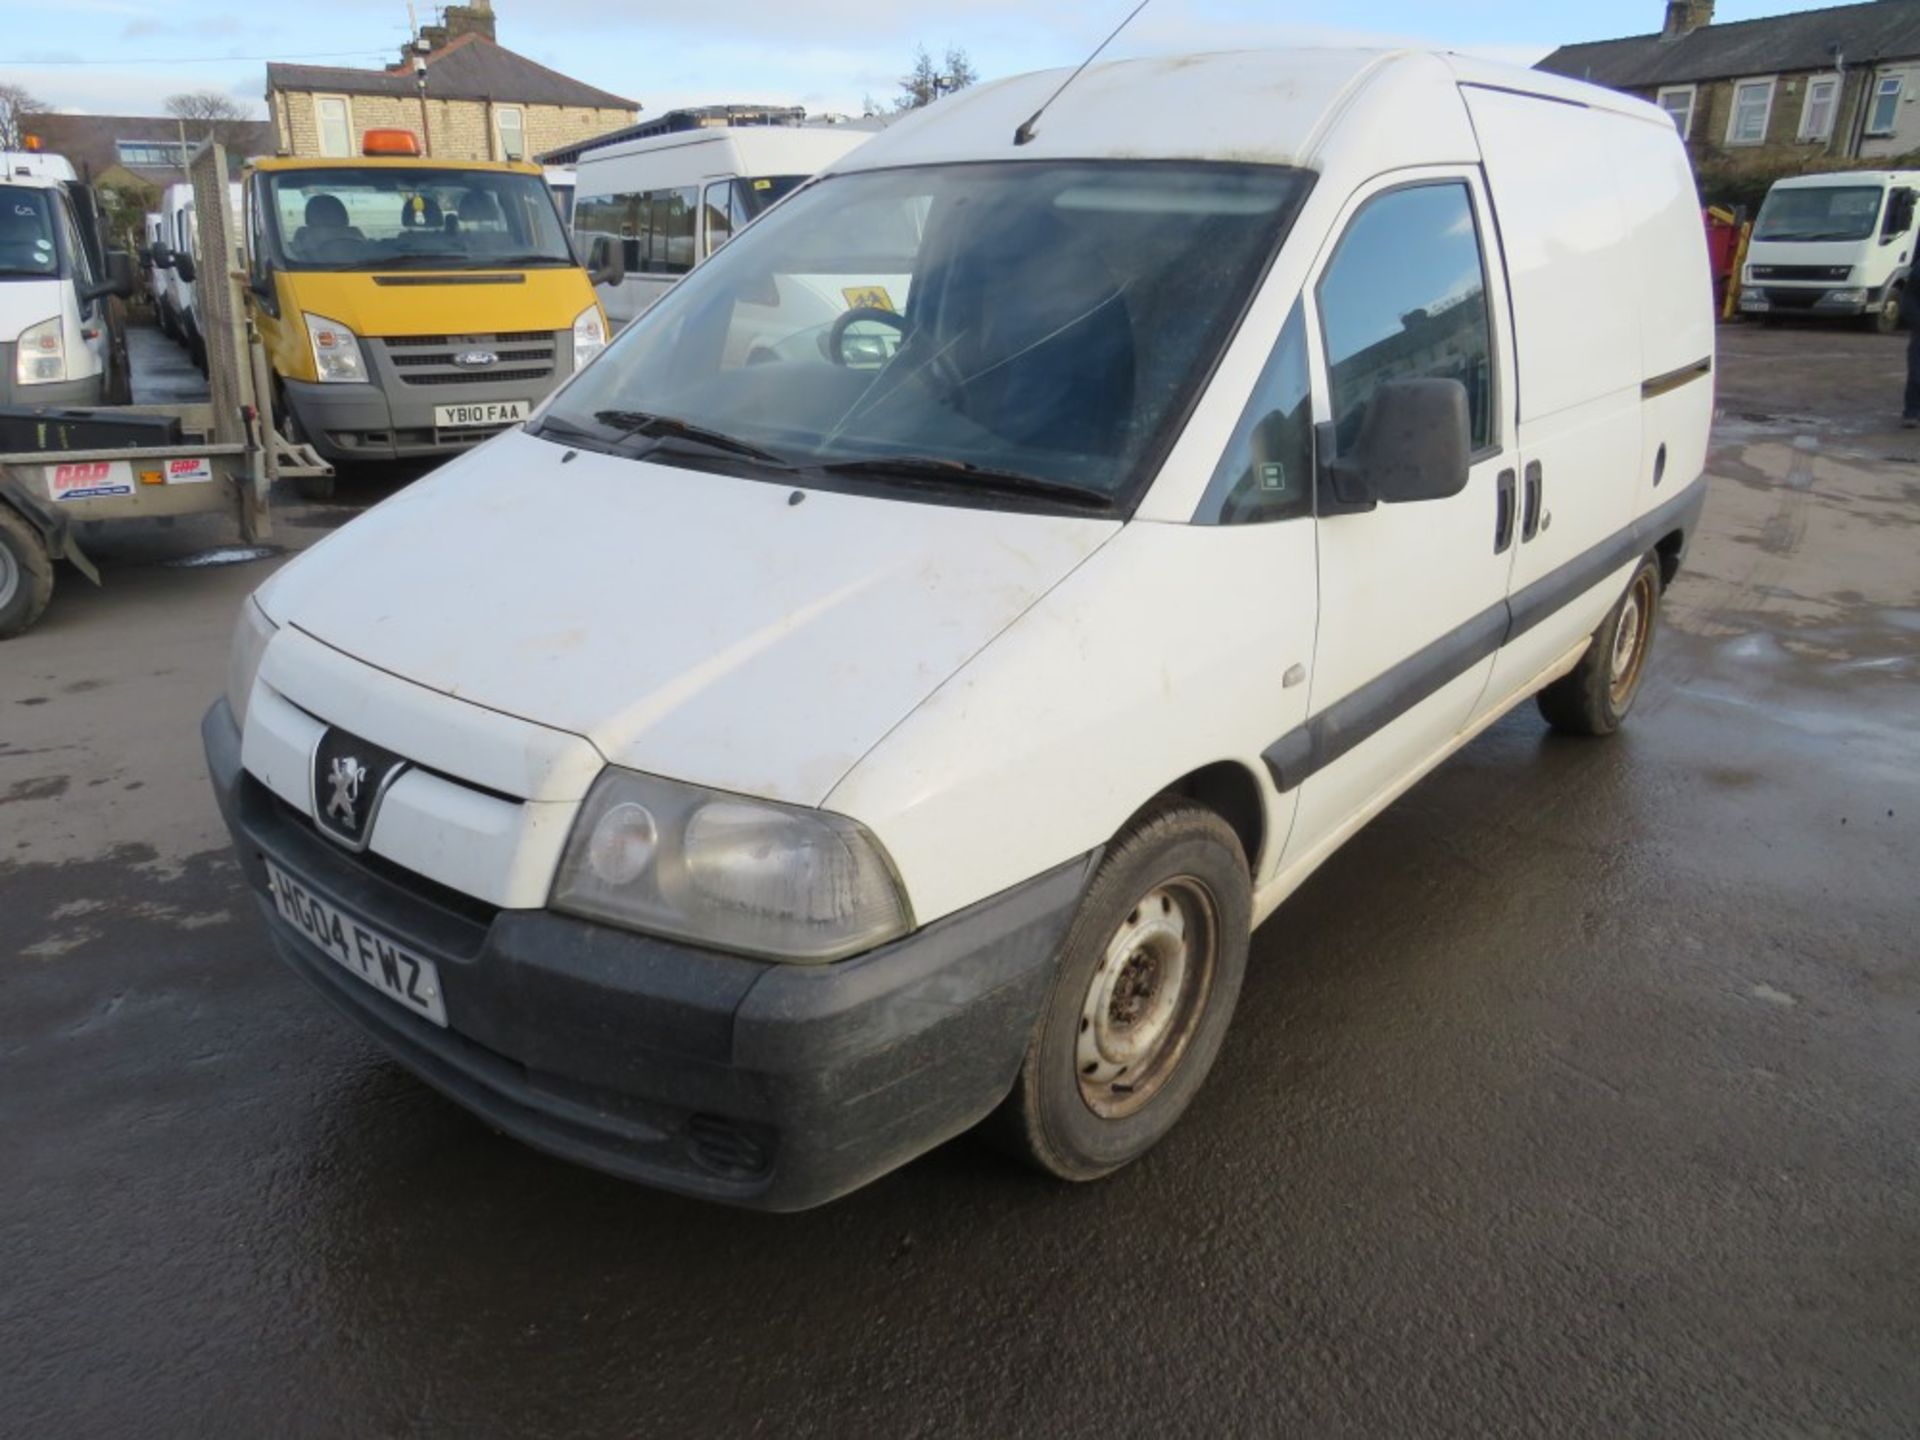 04 reg PEUGEOT EXPERT 900 HDI, 1ST REG 03/04, 164424M NOT WARRANTED, V5 HERE, 8 FORMER KEEPERS [+ - Image 2 of 6